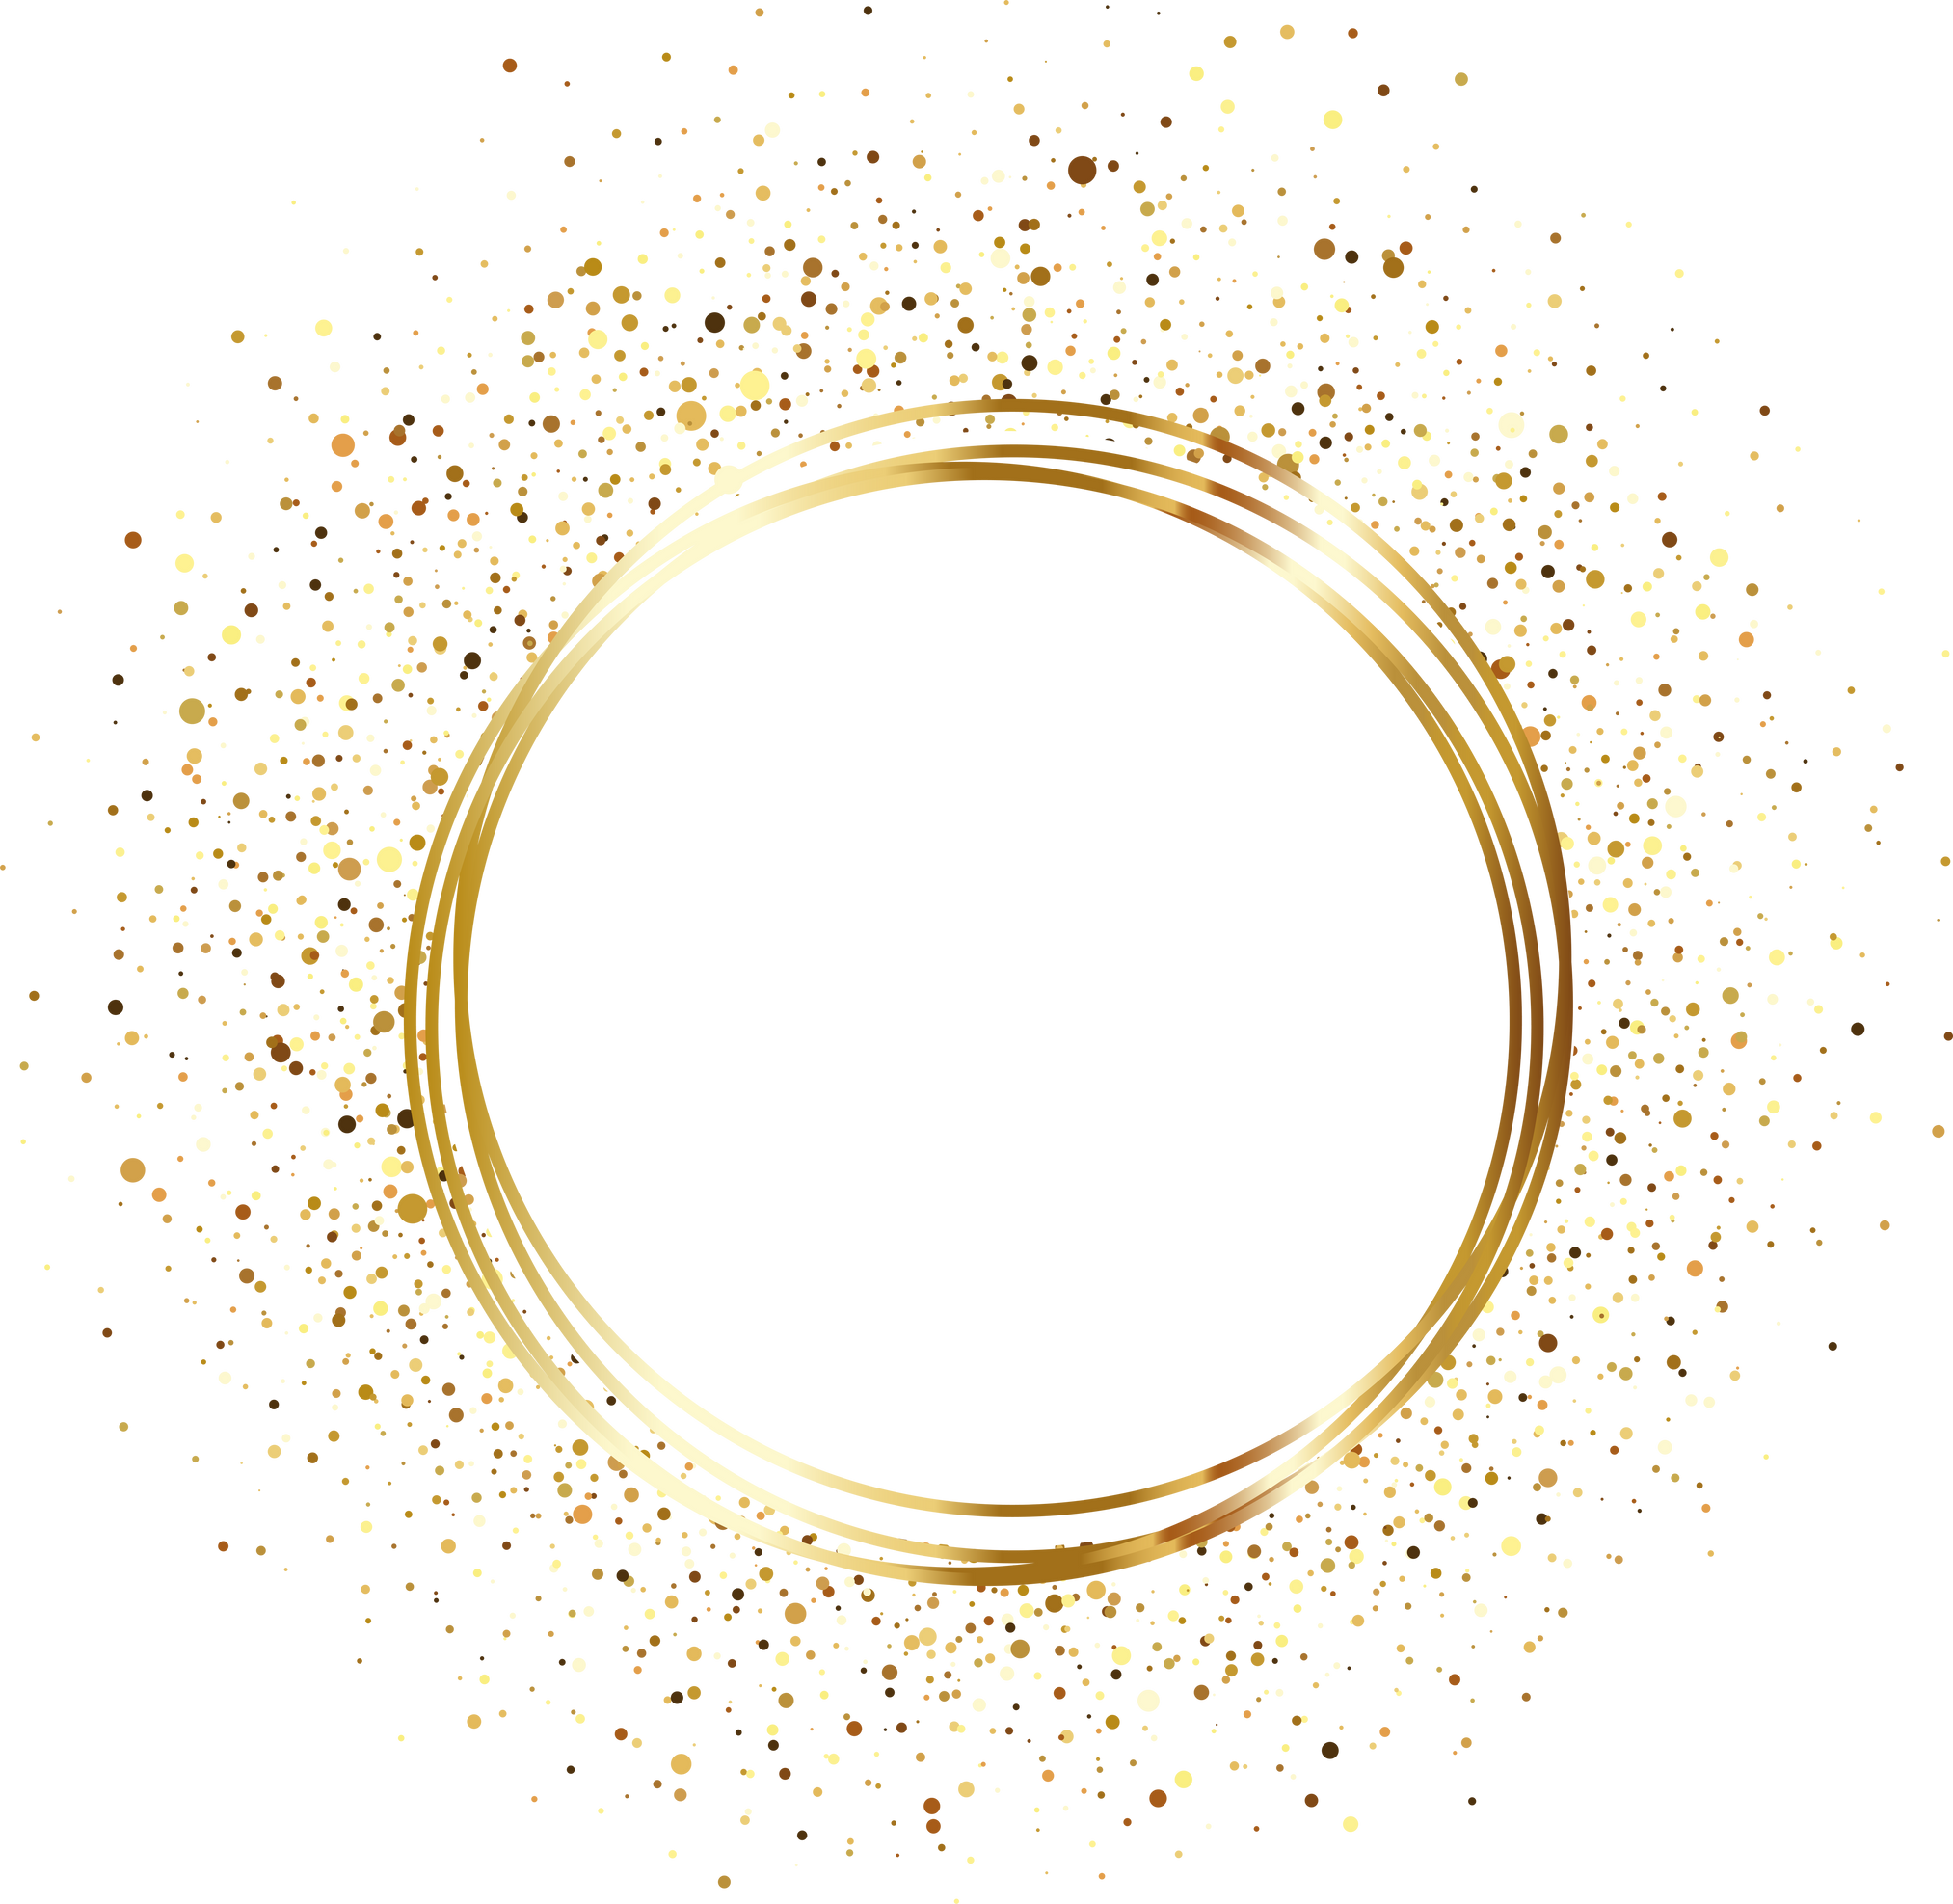 Gold round frame with flying glitter and sequins vector illustration